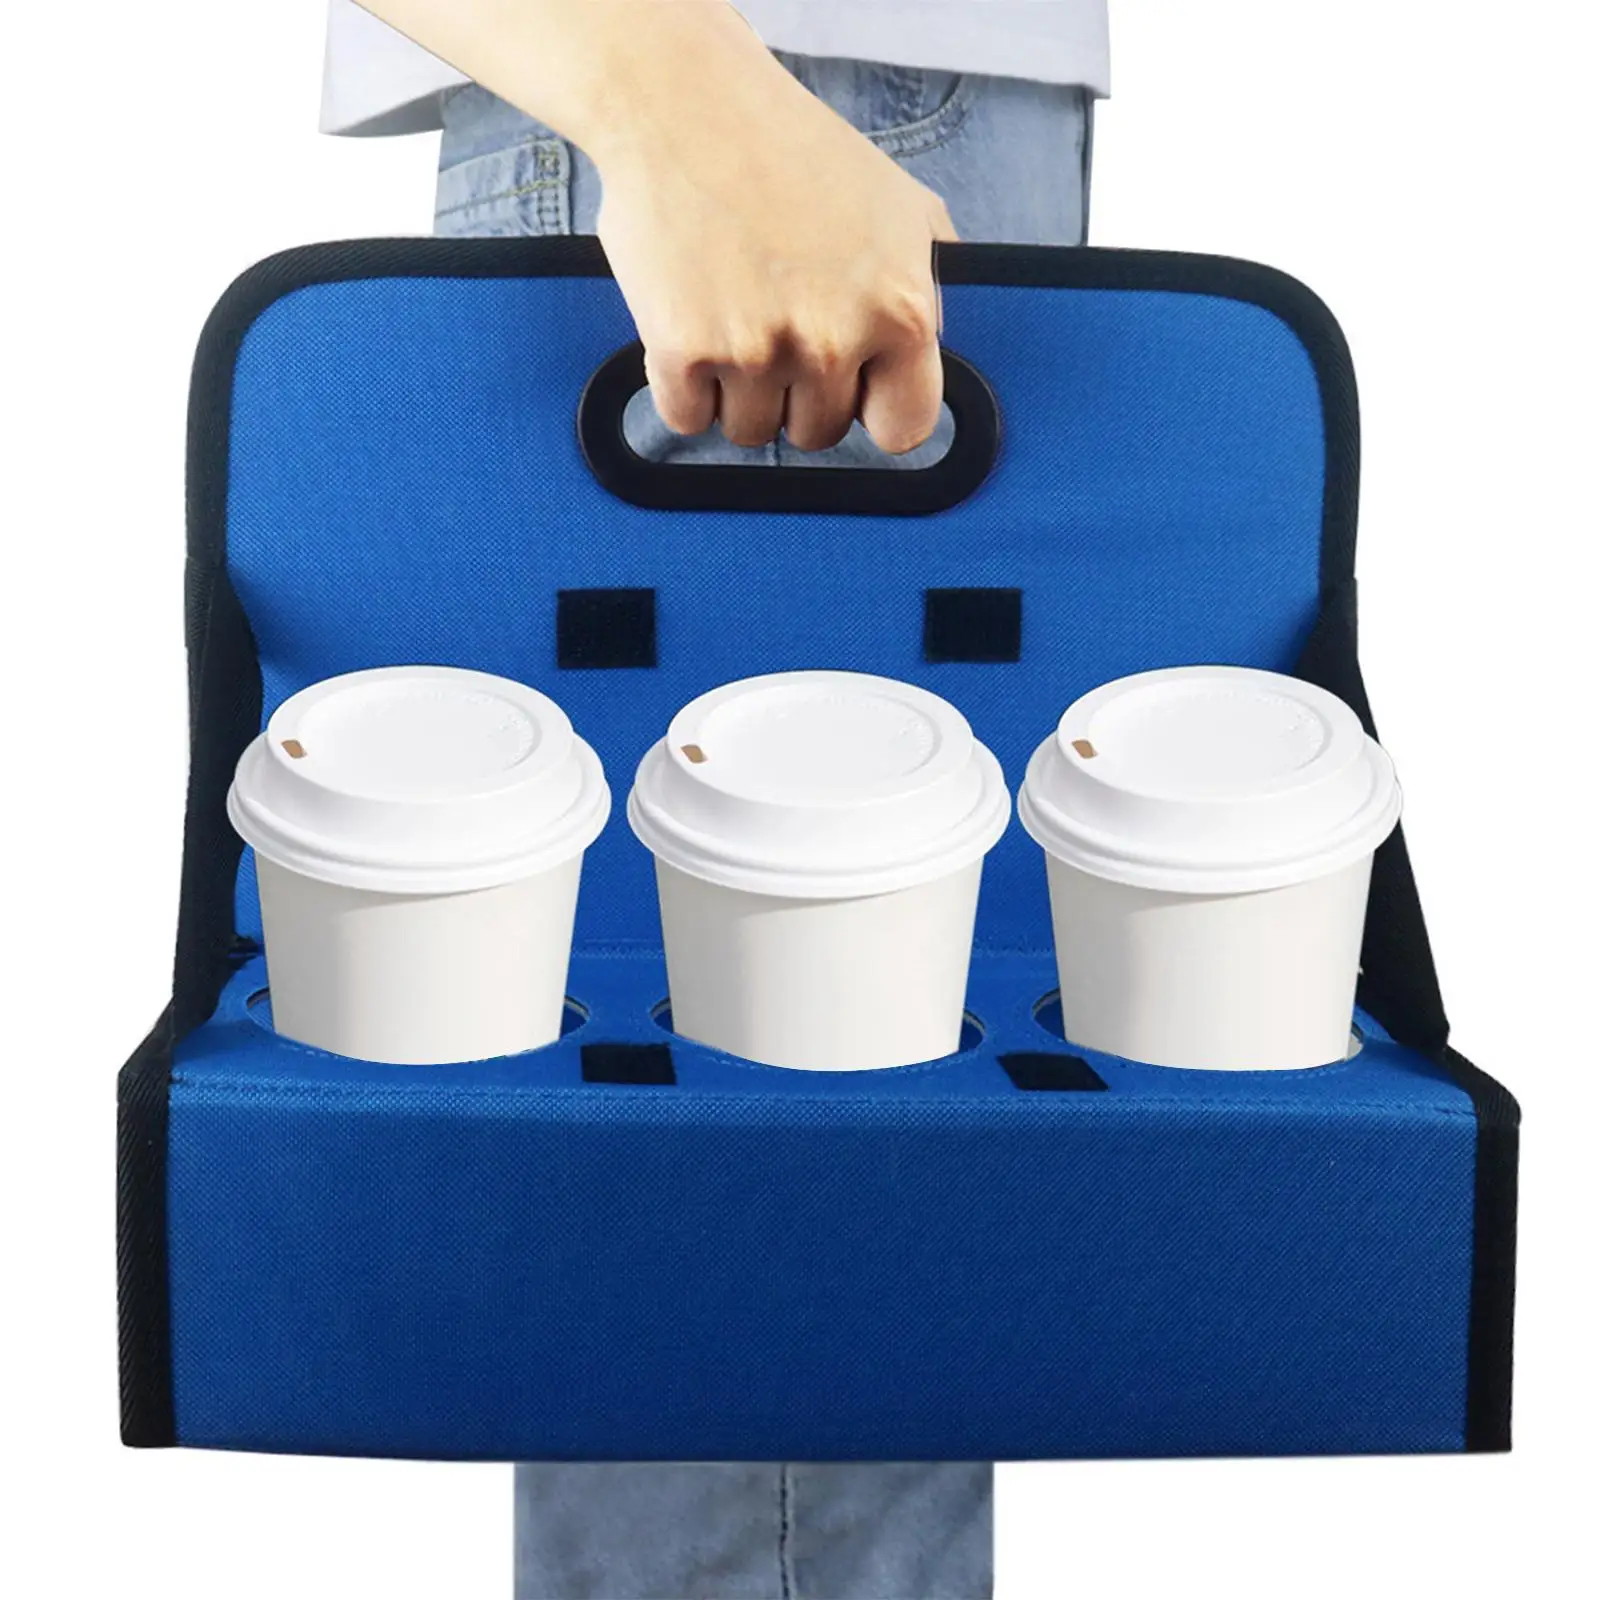 Cup Carrier Convenient Foldable Sturdy Frame Holds 6 Cups cup for Outdoor Activities Picnic Restaurant Food Delivery Beach